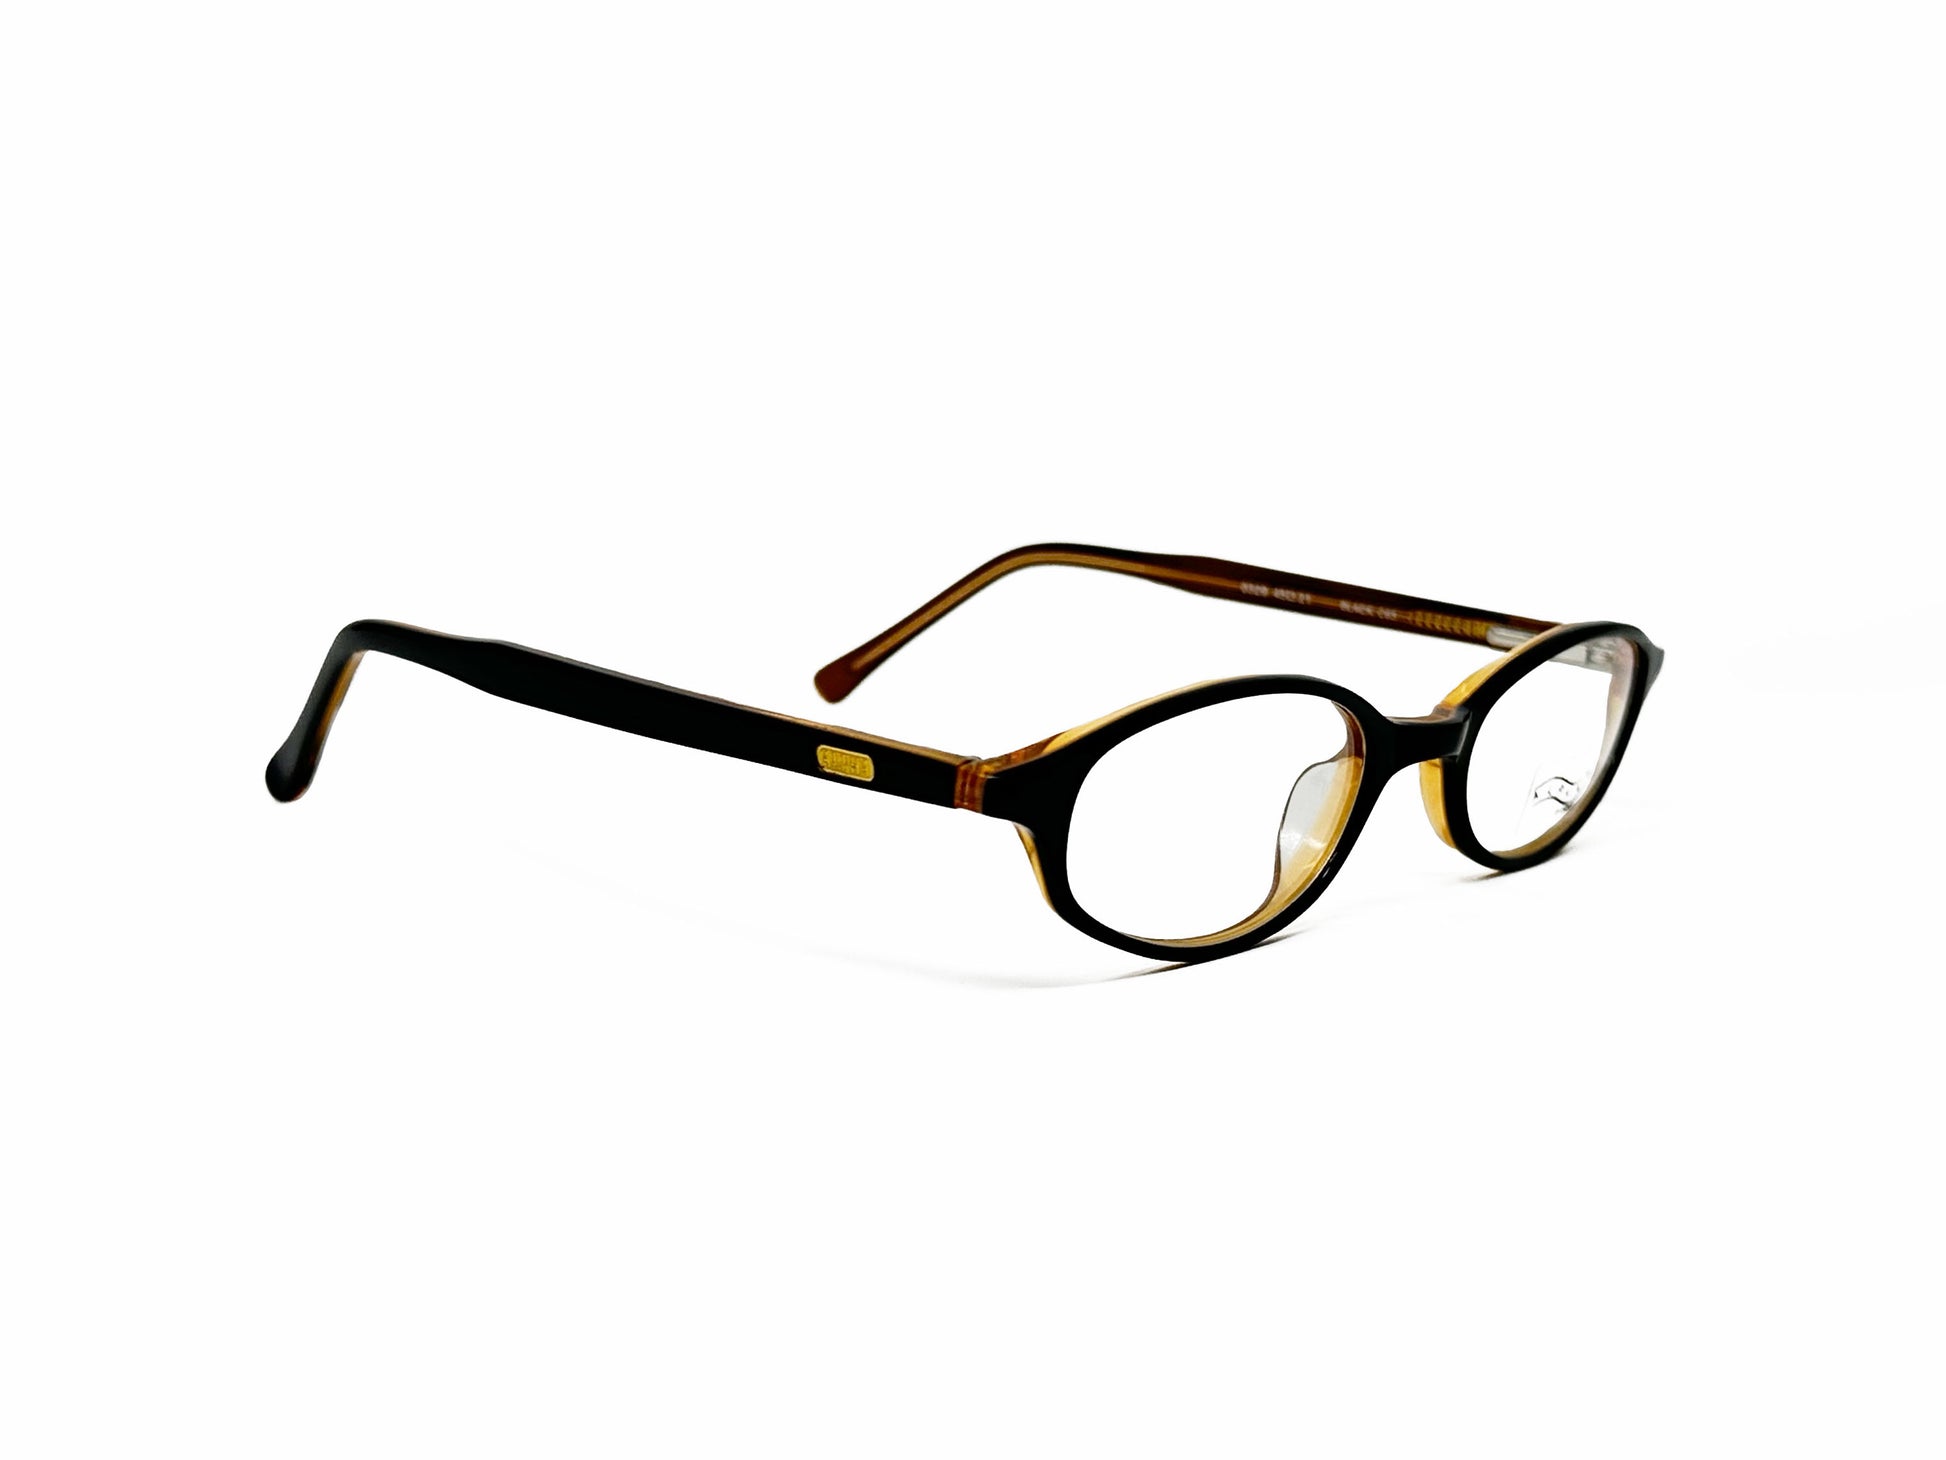 Alpha oval, acetate optical frame. Model: 0329. Color: Black C65 - Black with cream accents. Side view.